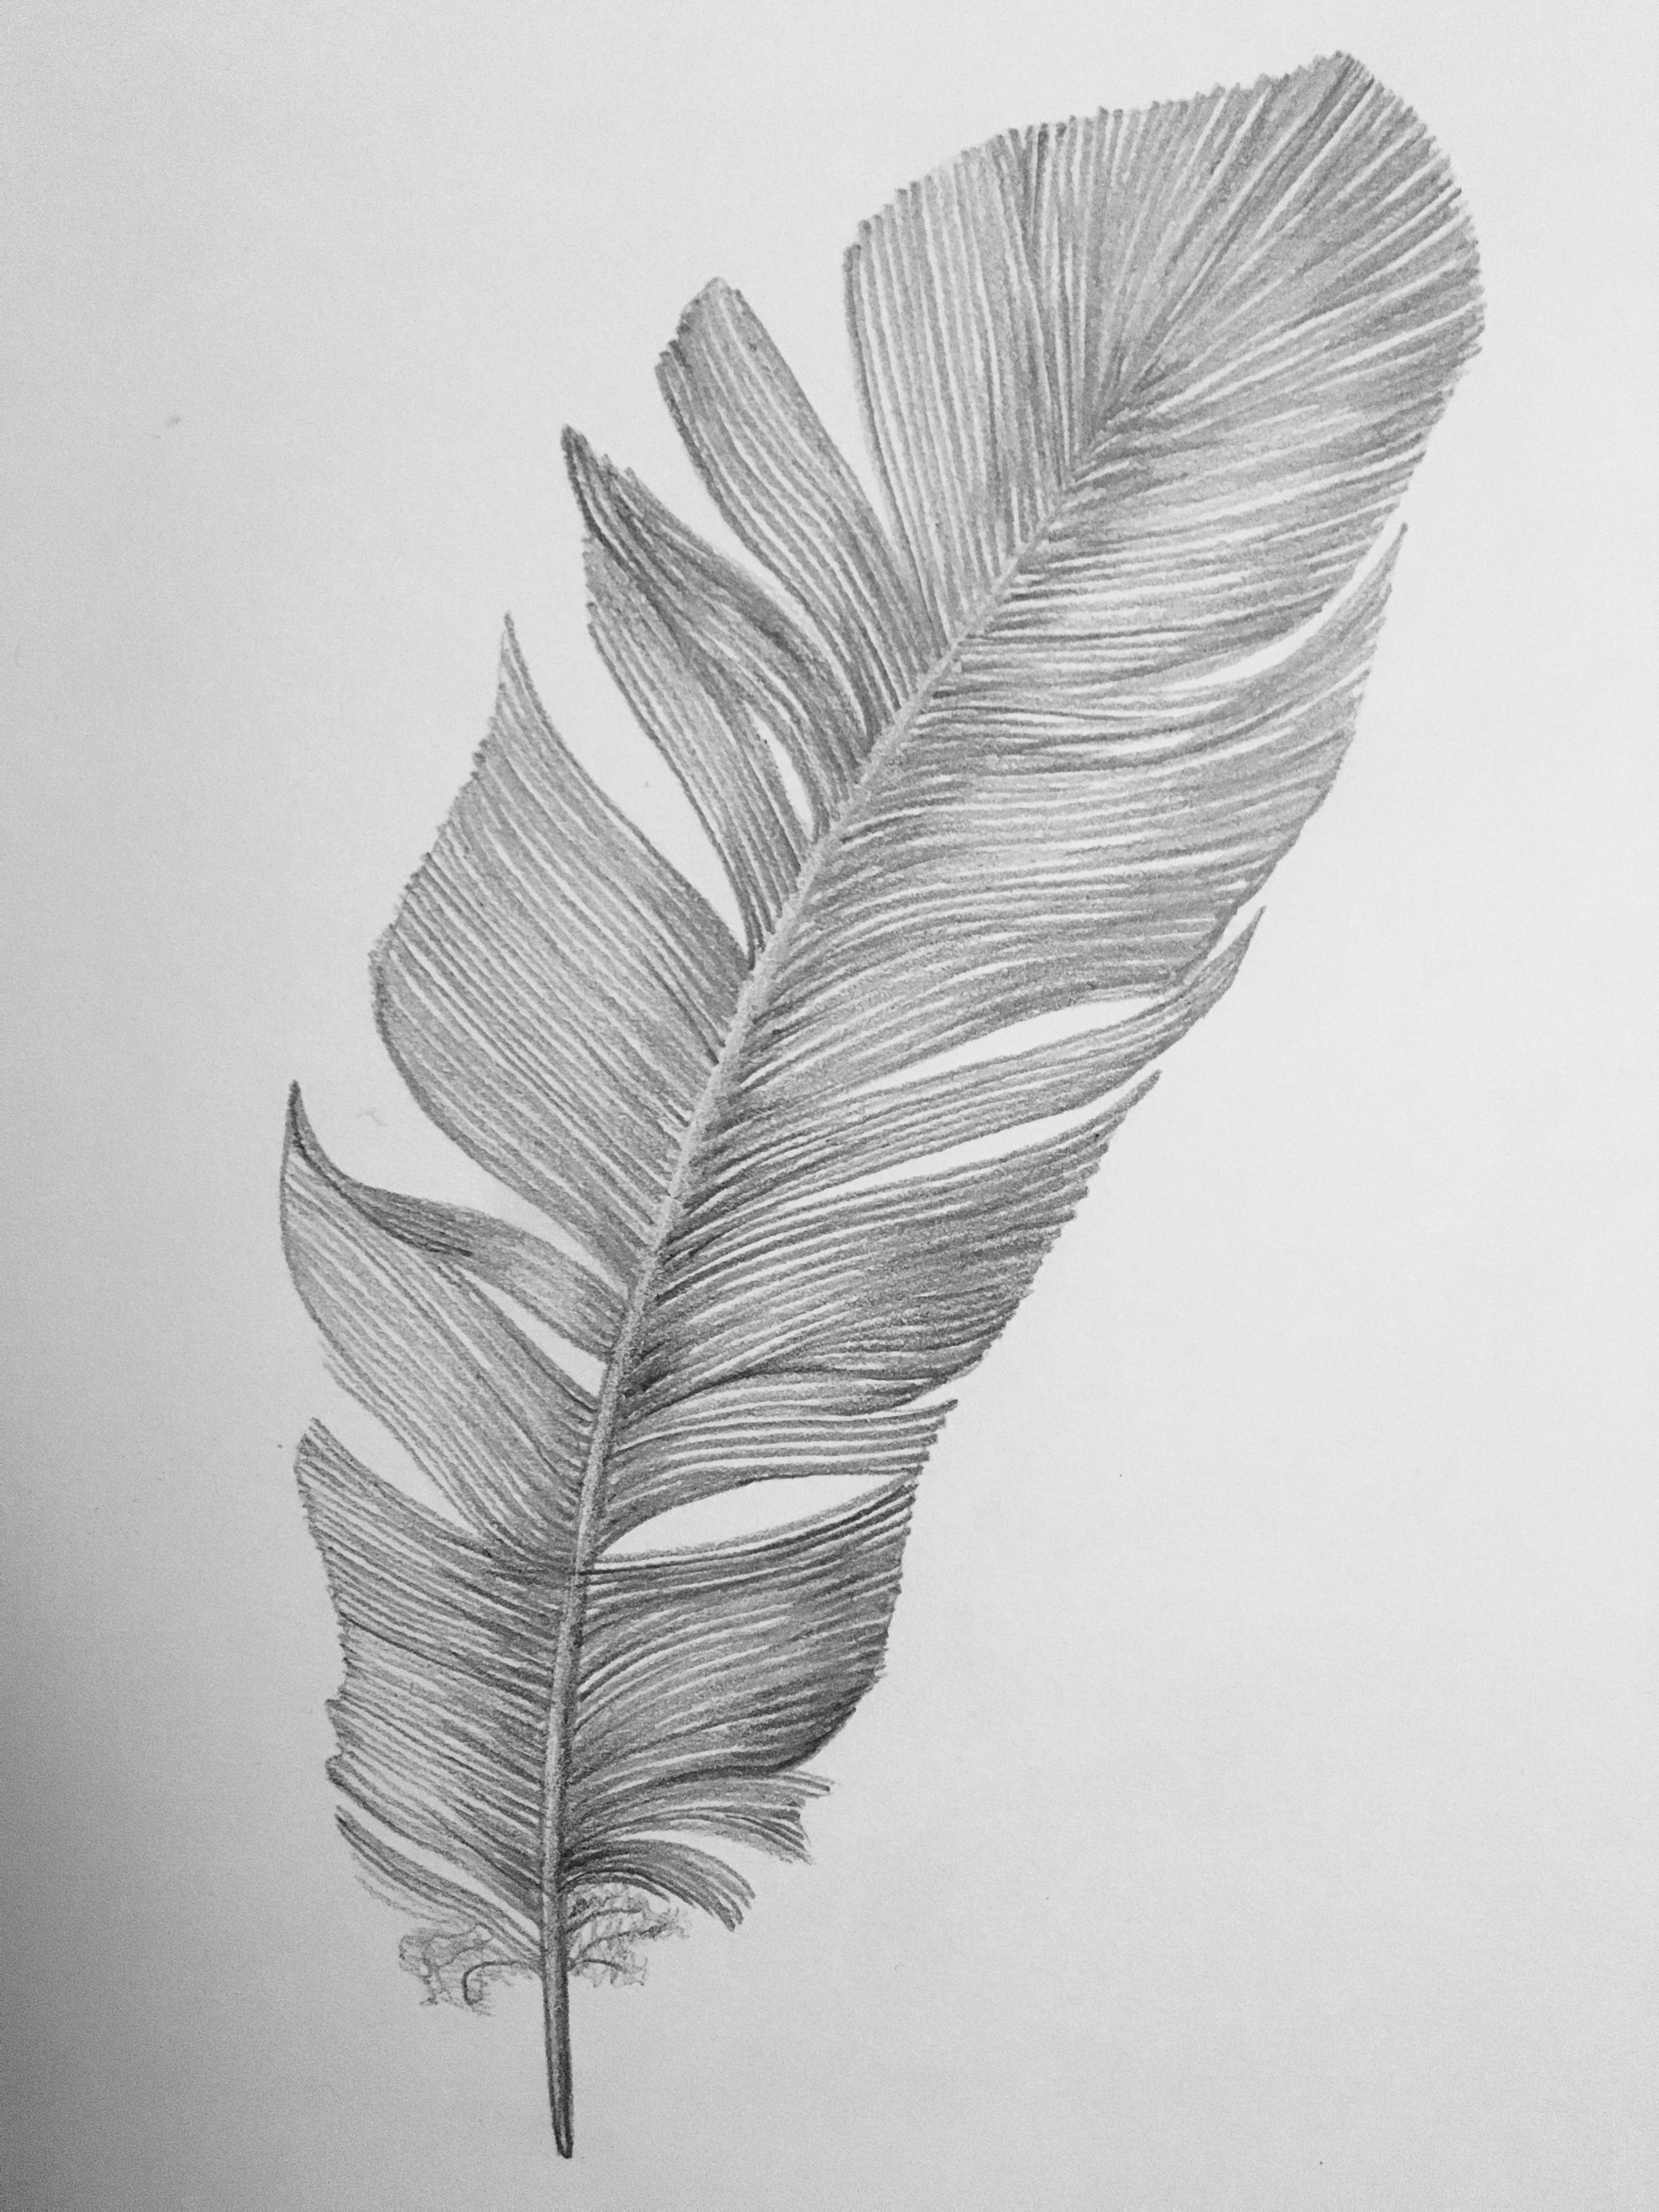 Feather Pencil Sketch at PaintingValley.com | Explore collection of ...